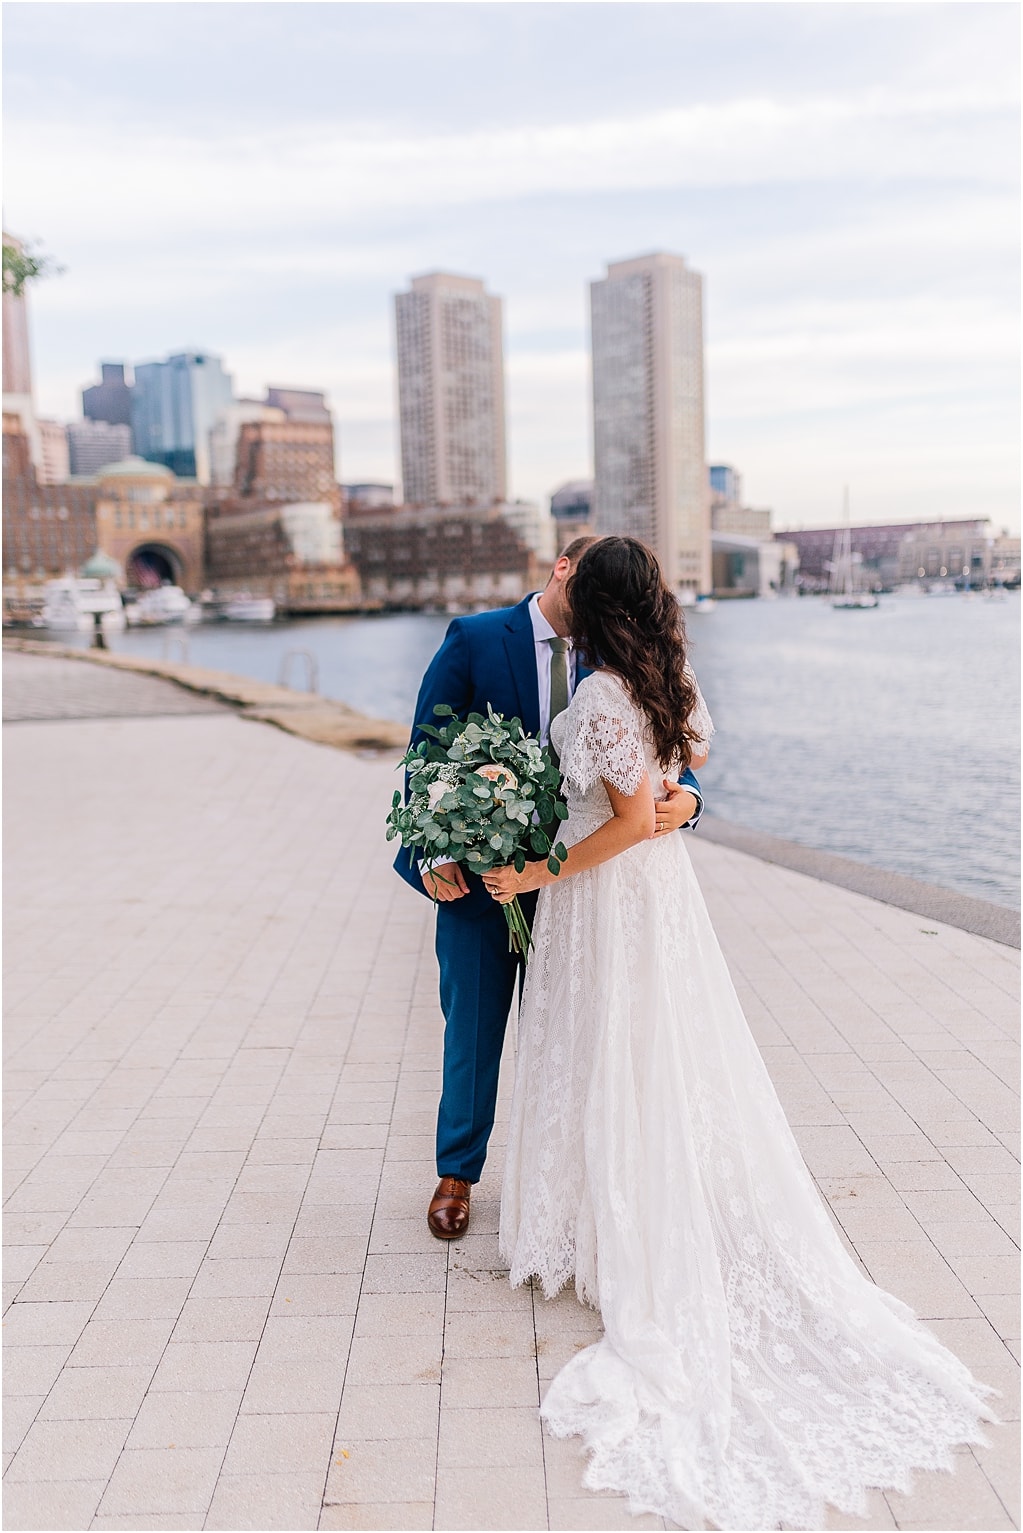 Sacramento wedding photographer captures bride and groom standing on the water with the skyline behind them and kissing on their wedding day